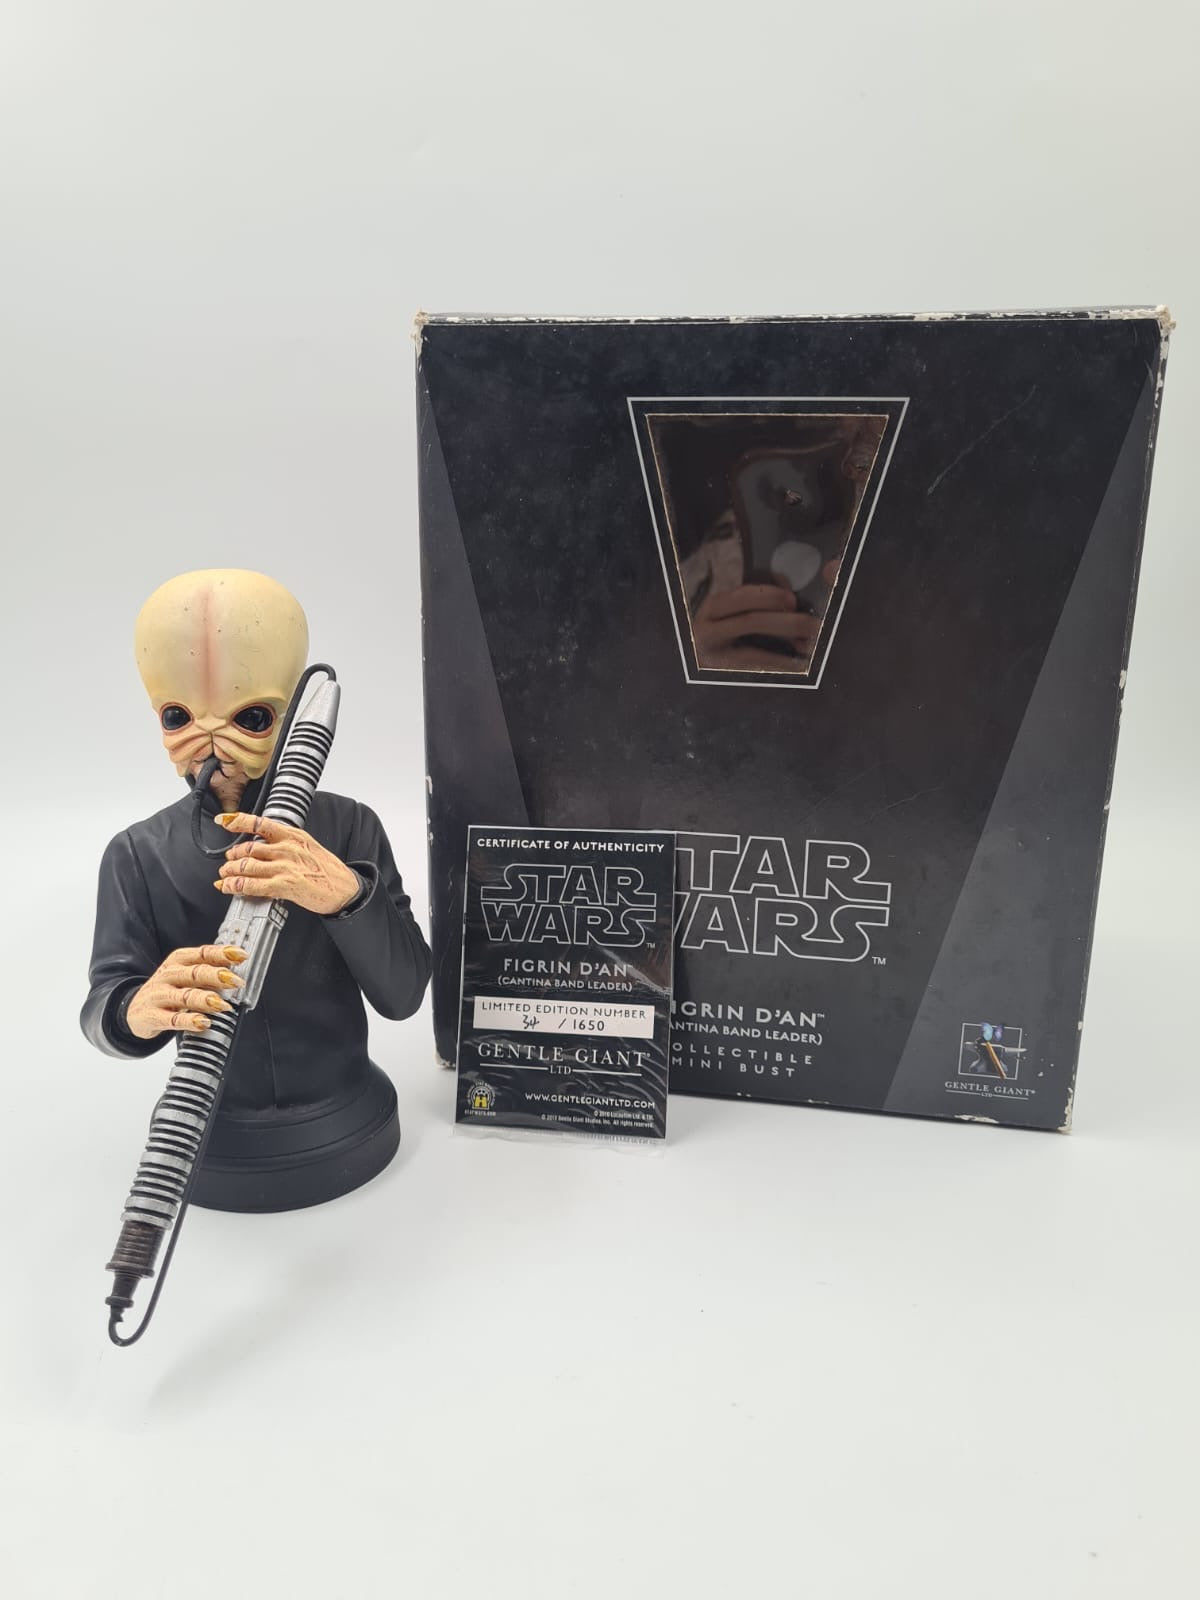 FIGRIN D´AN (CANTINA BAND LEADER) COLLECTIBLE MINI BUST GENTLE GIANT